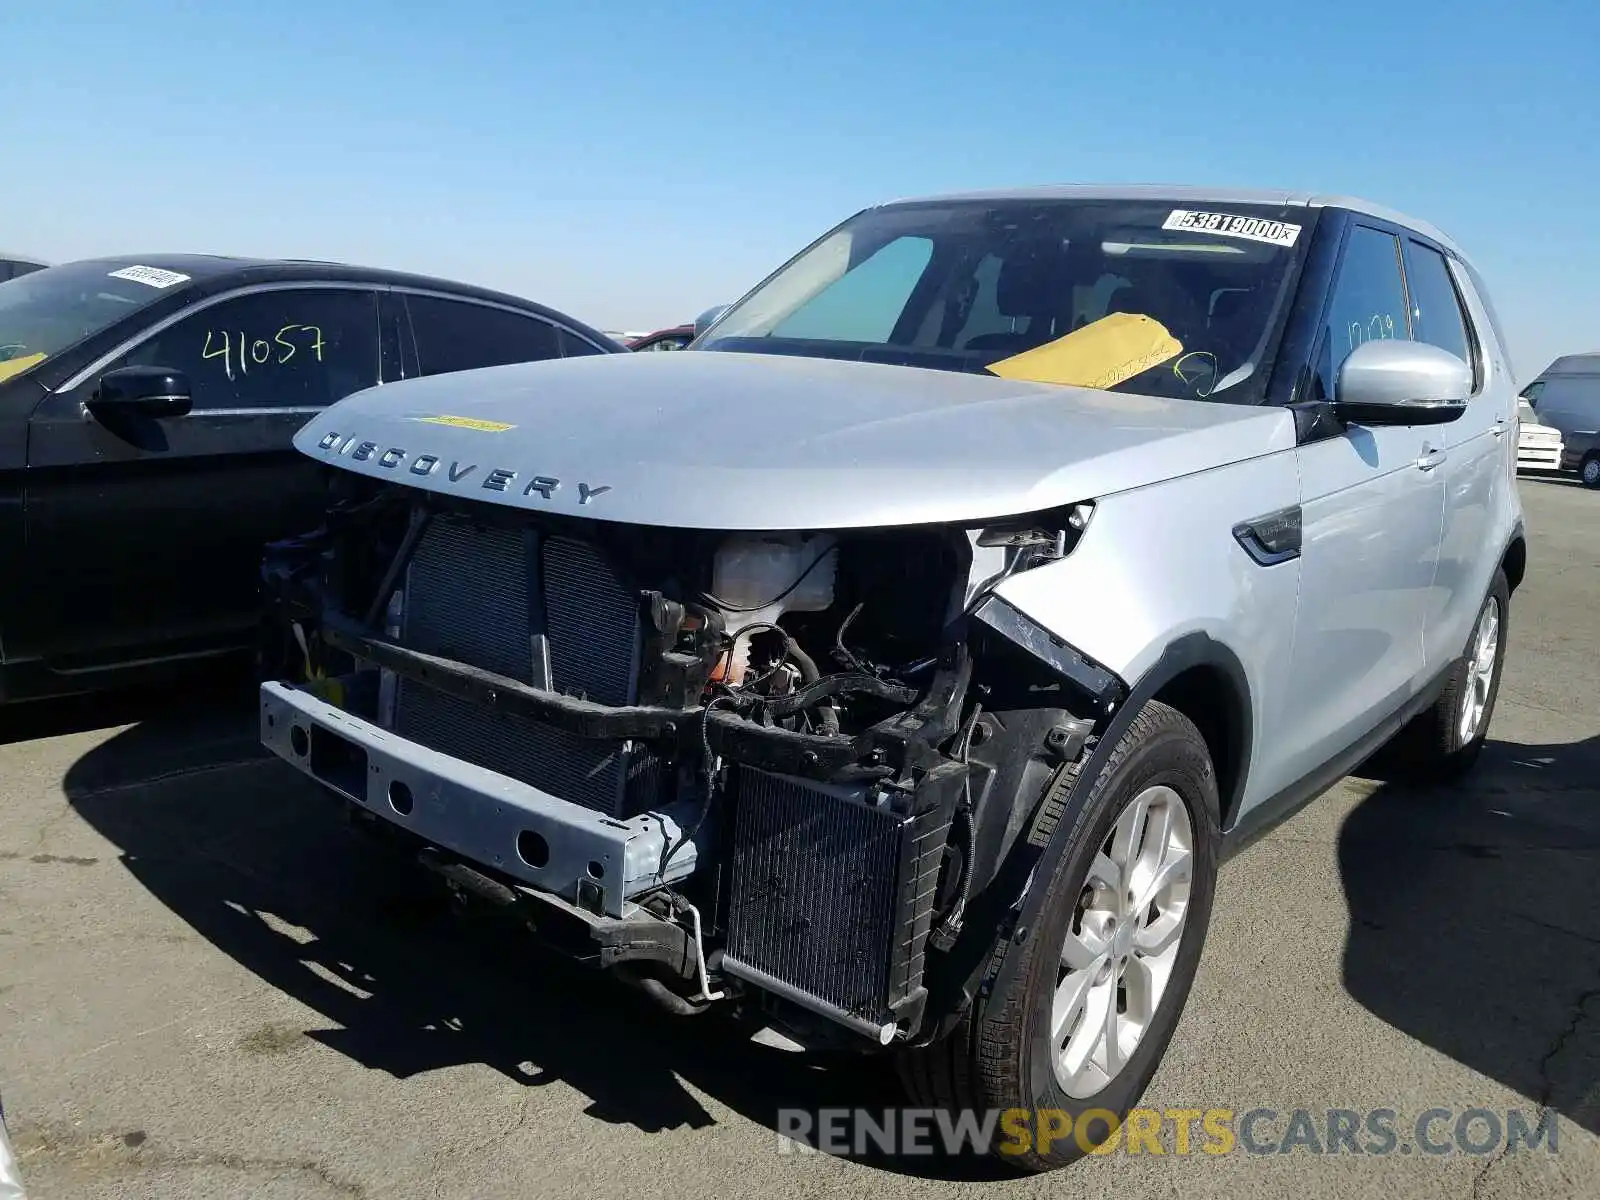 2 Photograph of a damaged car SALRG2RV3L2430054 LAND ROVER DISCOVERY 2020